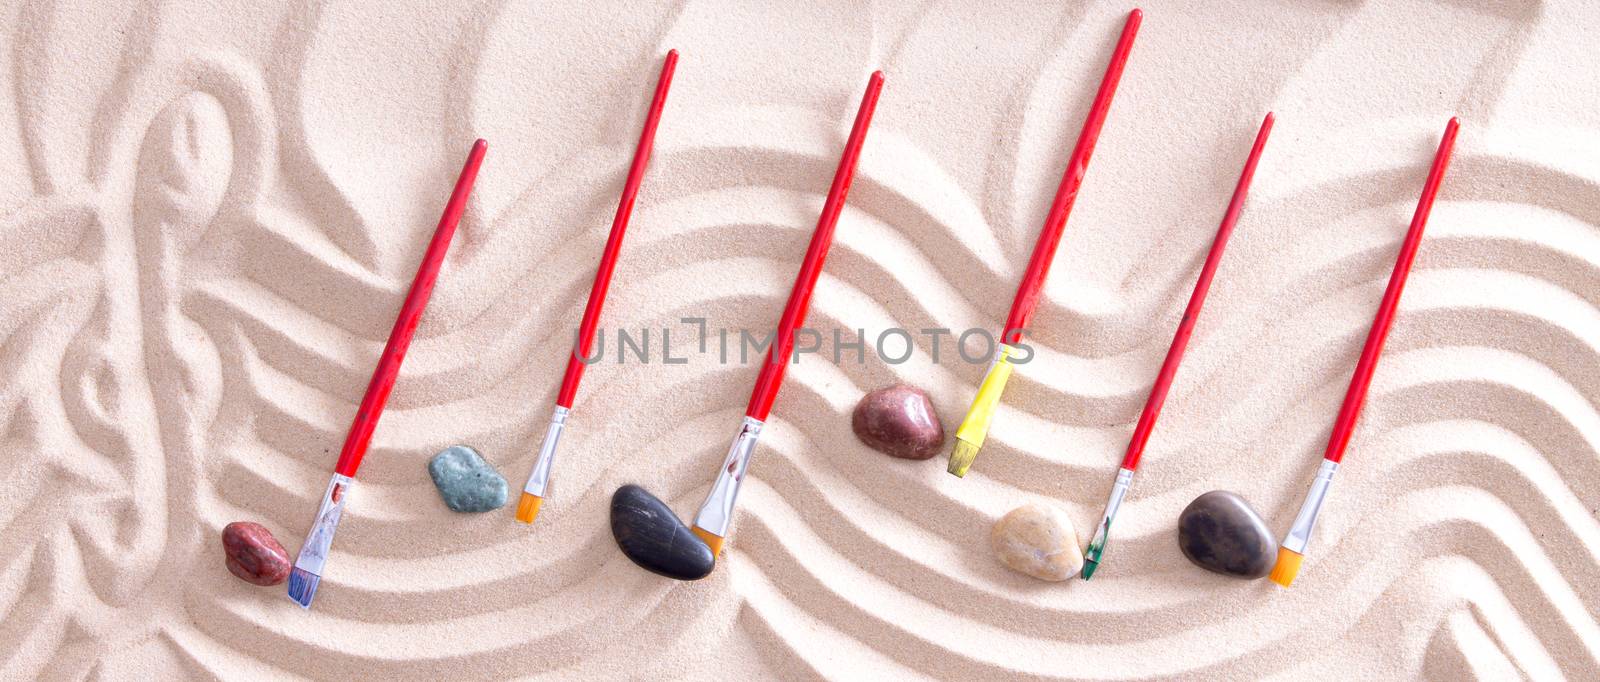 High Angle View of Music Staff with Treble Cleff Drawn Into Sand and Paintbrushes and Stones for Music Notes, Creating Music on Beach with Nature and Artistic Inspiration